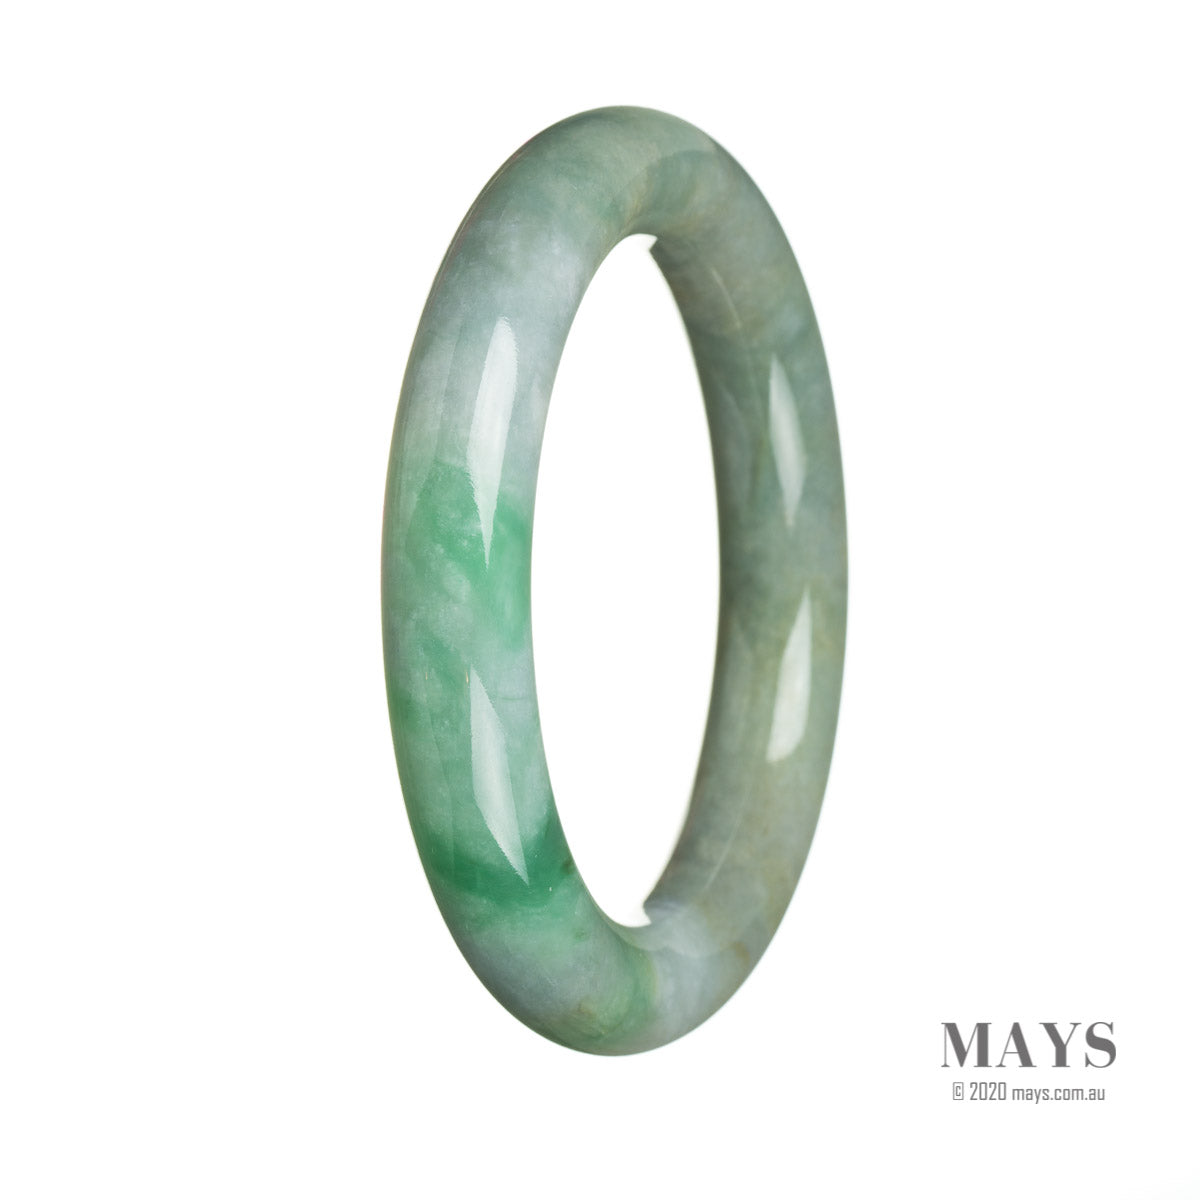 An elegant grey with green jadeite bangle, untreated and genuine, with a round shape measuring 56mm. From MAYS™.